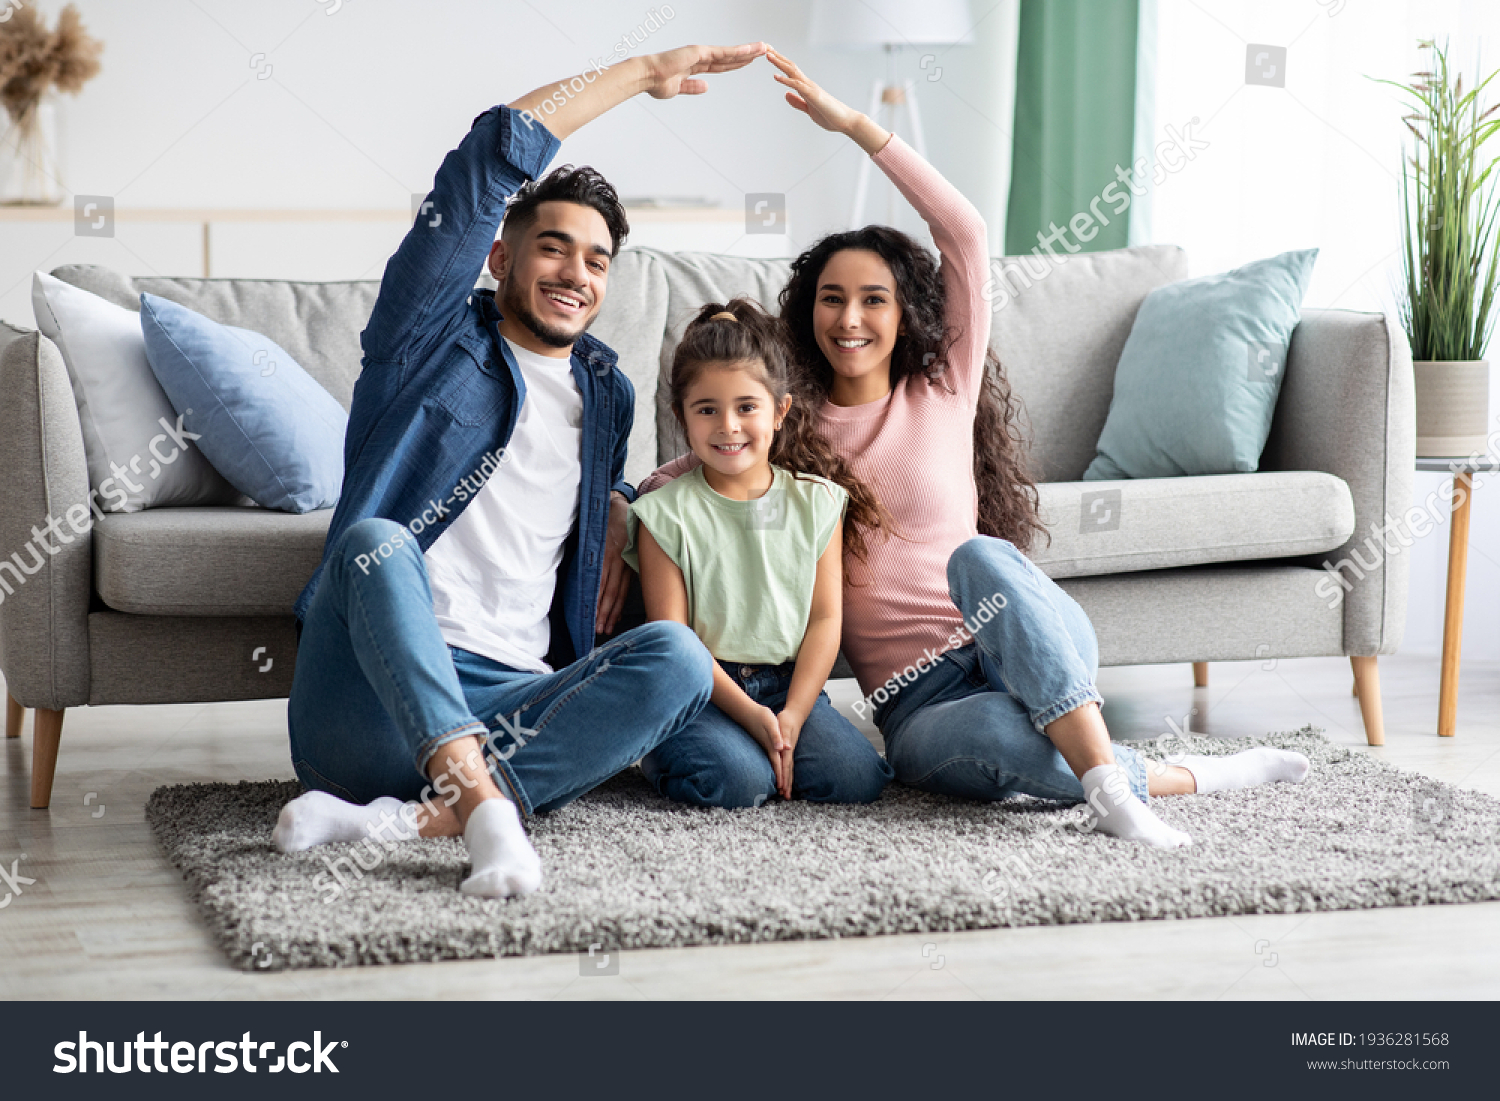 Family Protection. Mom And Dad Making Roof Of Hands Above Their Daughter #1936281568